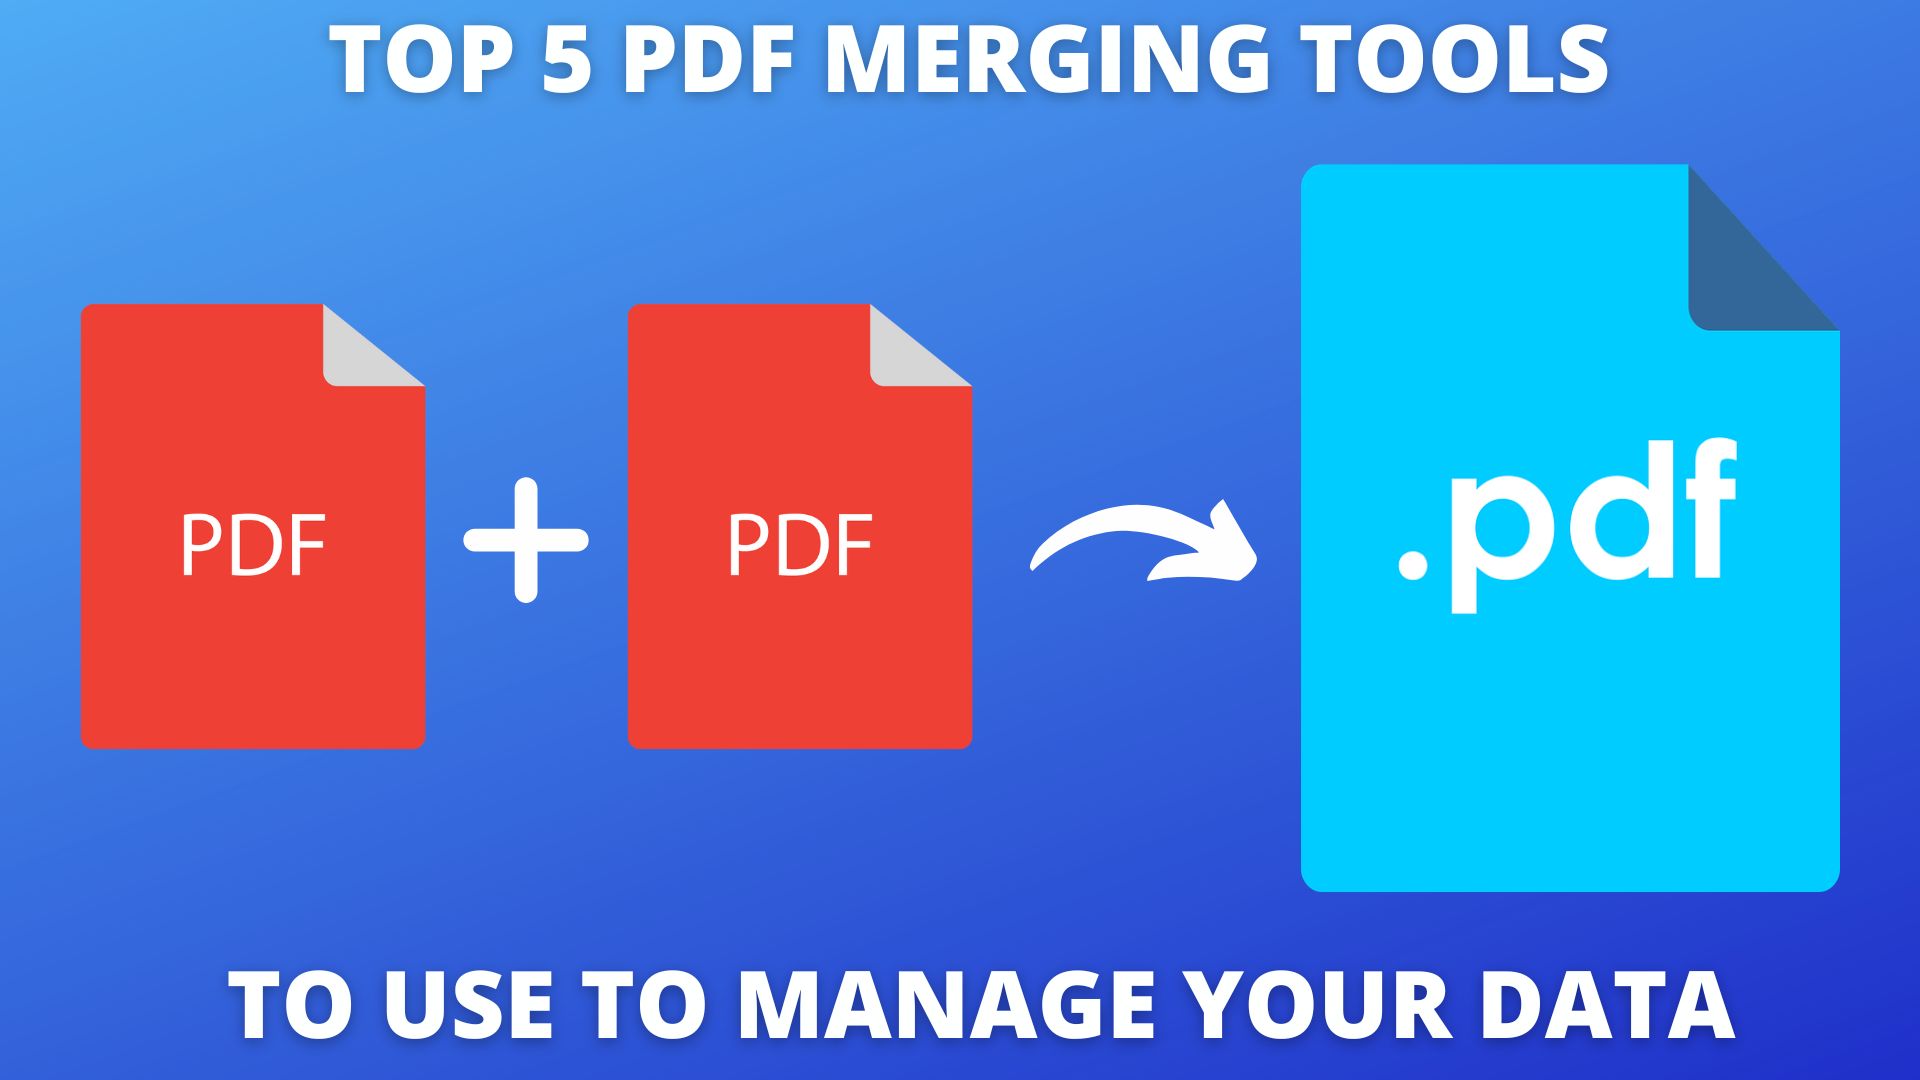 Top 5 PDF Merging Tools To Use To Manage Your Data